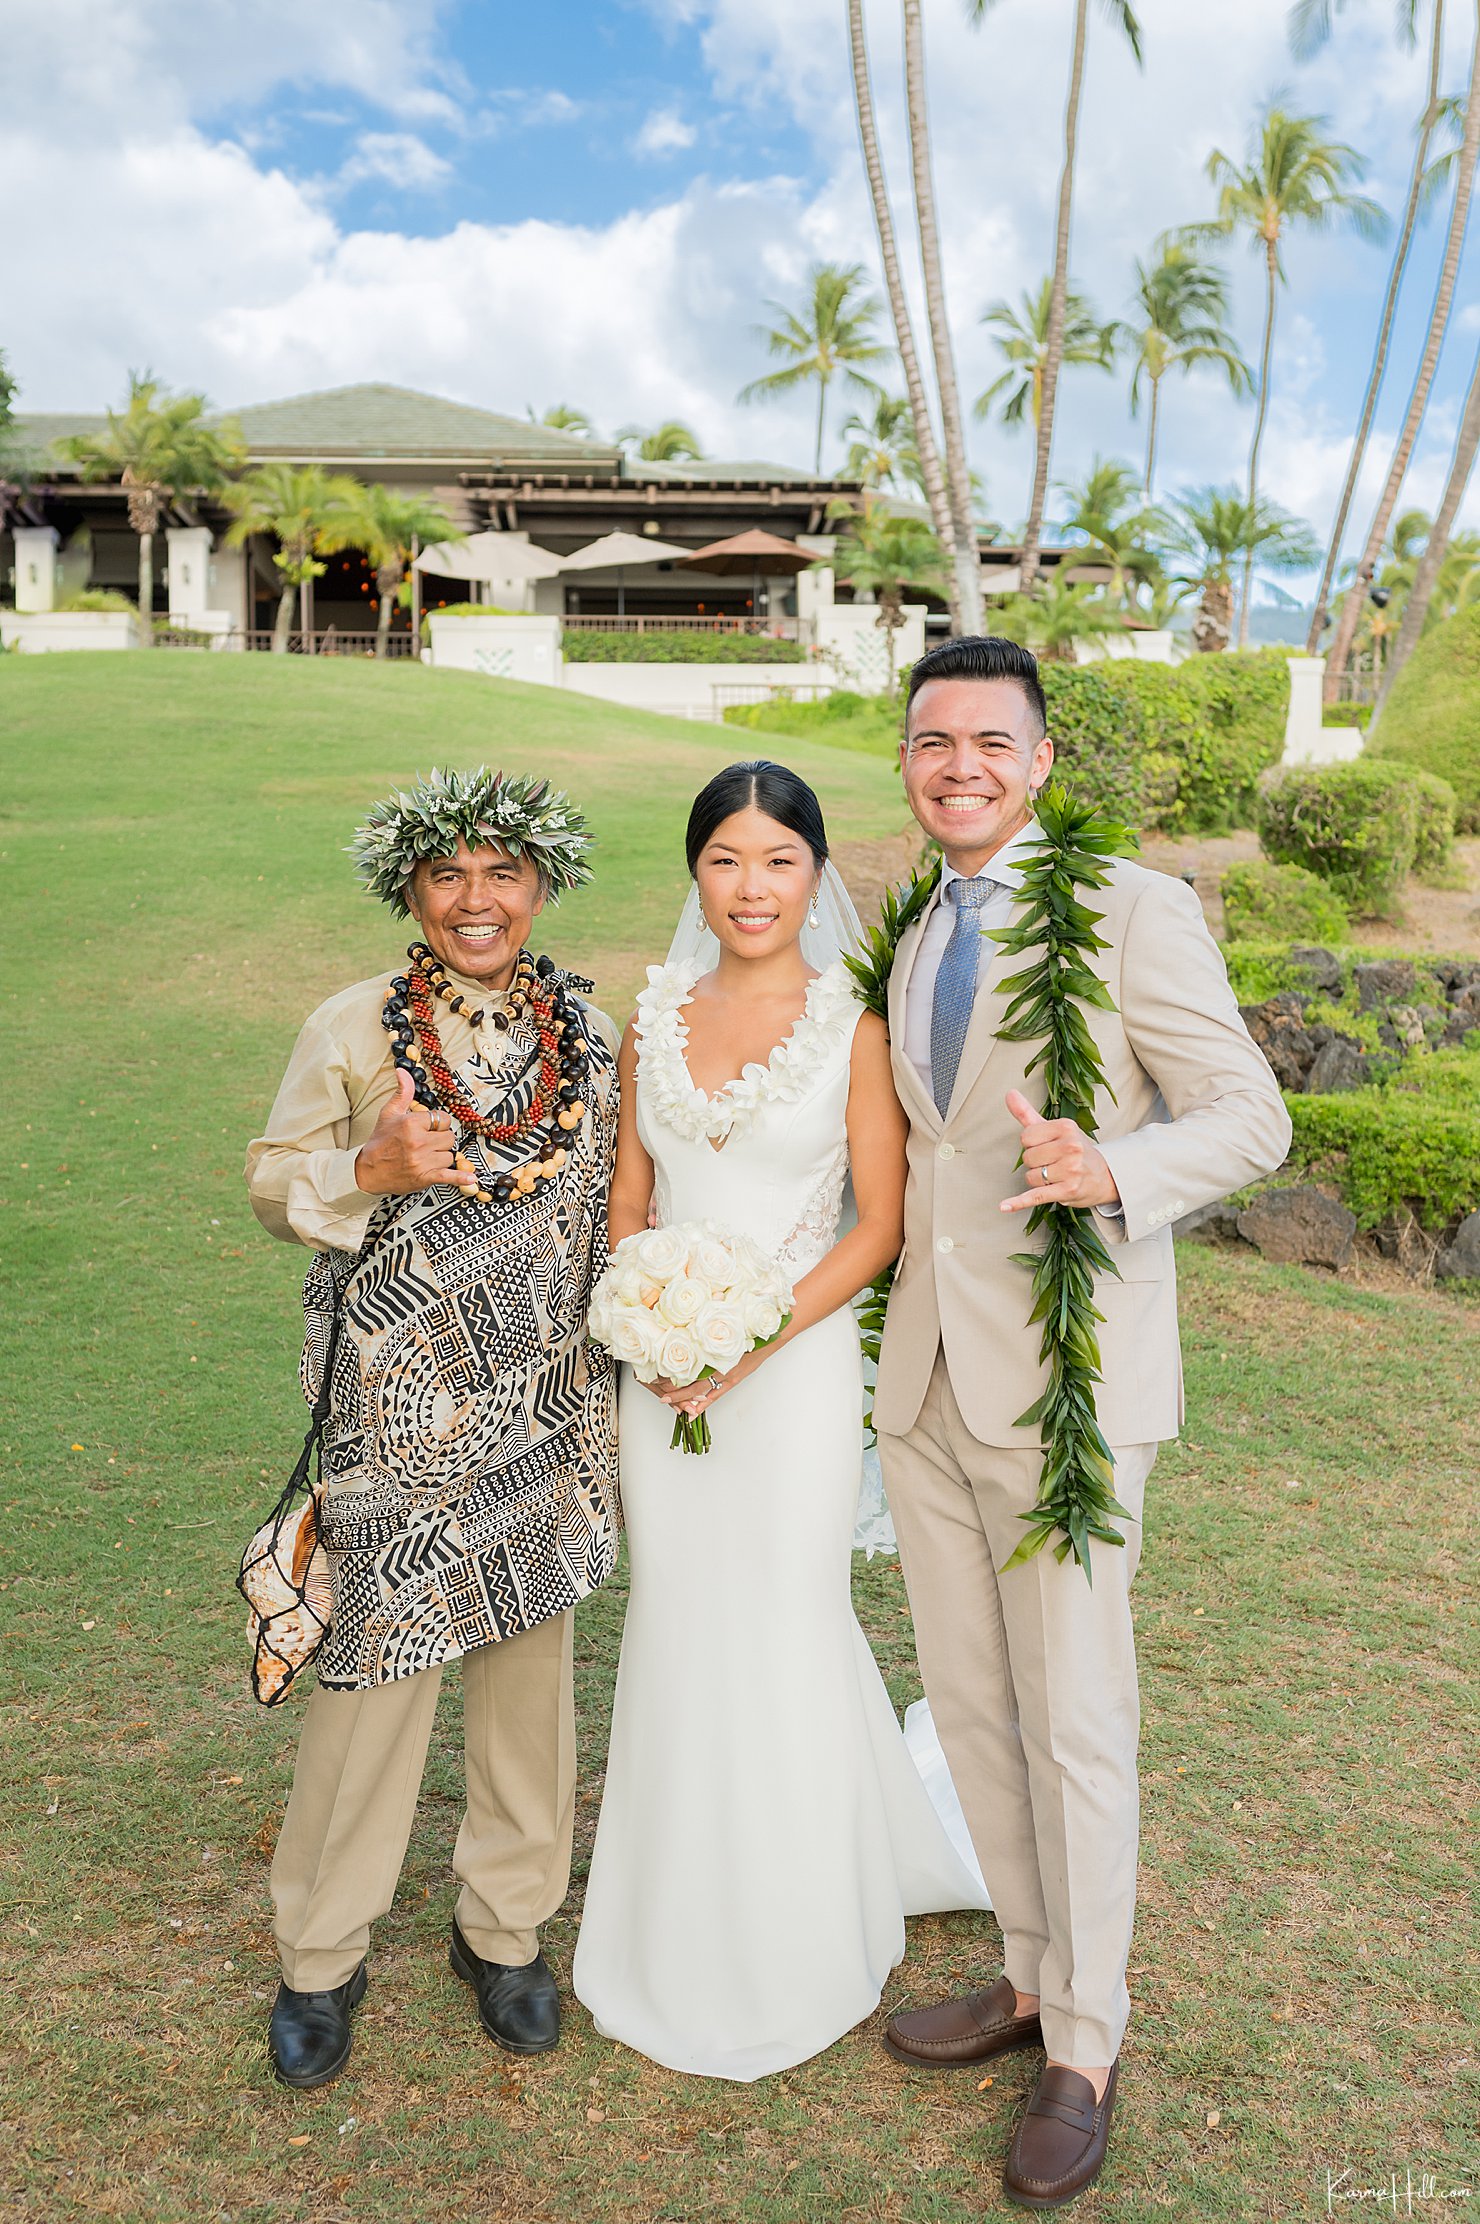 Maui ministers and Officiants